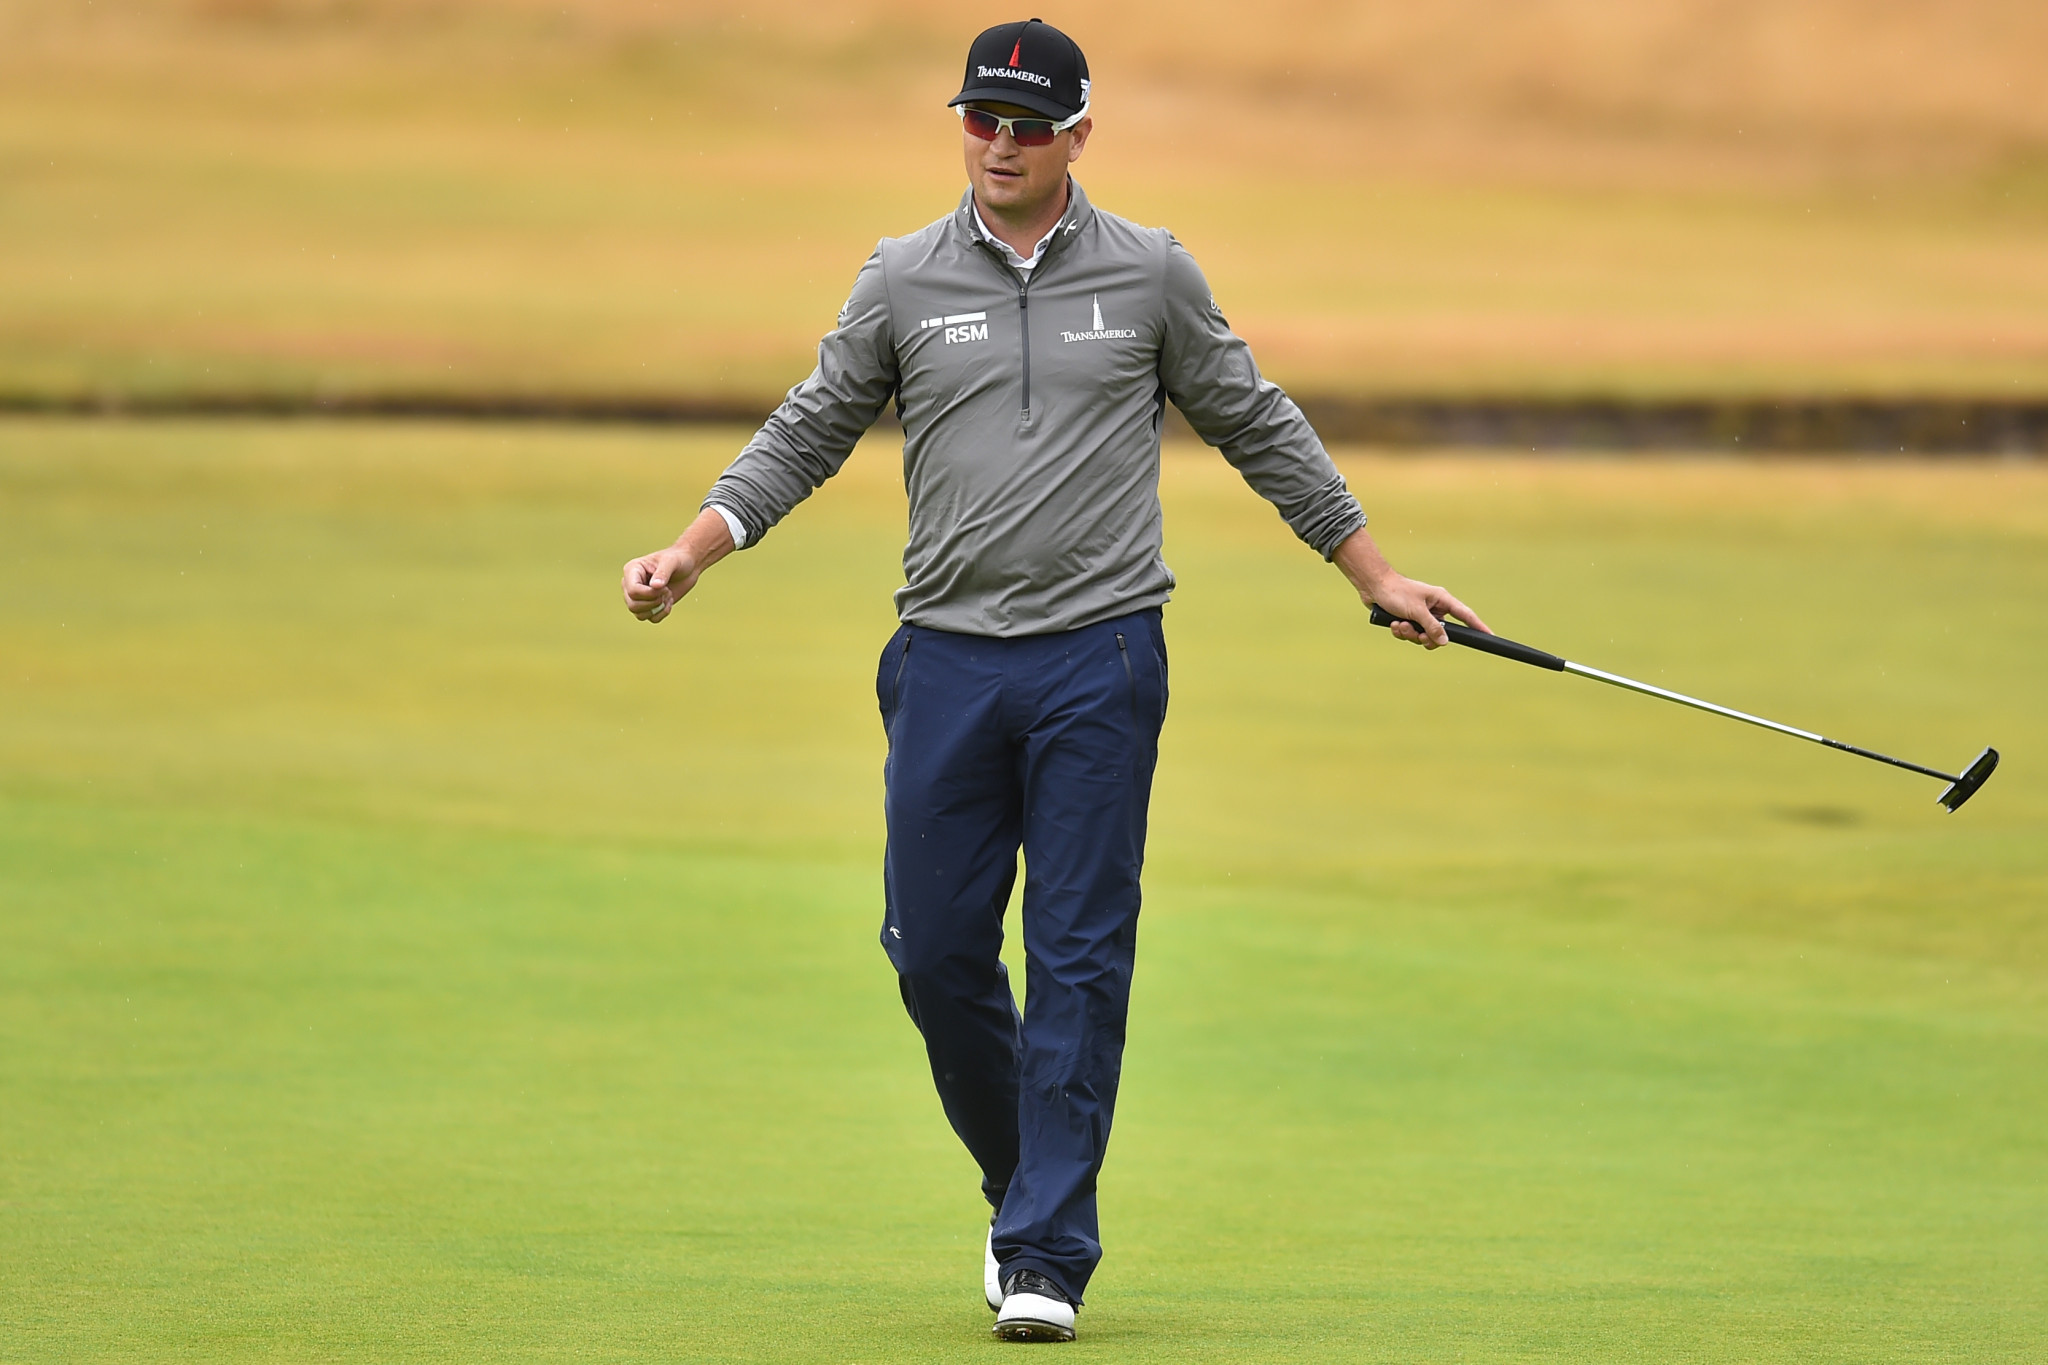 Zach Johnson, pictured, and fellow American Kevin Kisner share The Open lead going into the weekend at Carnoustie in Scotland ©Getty Images